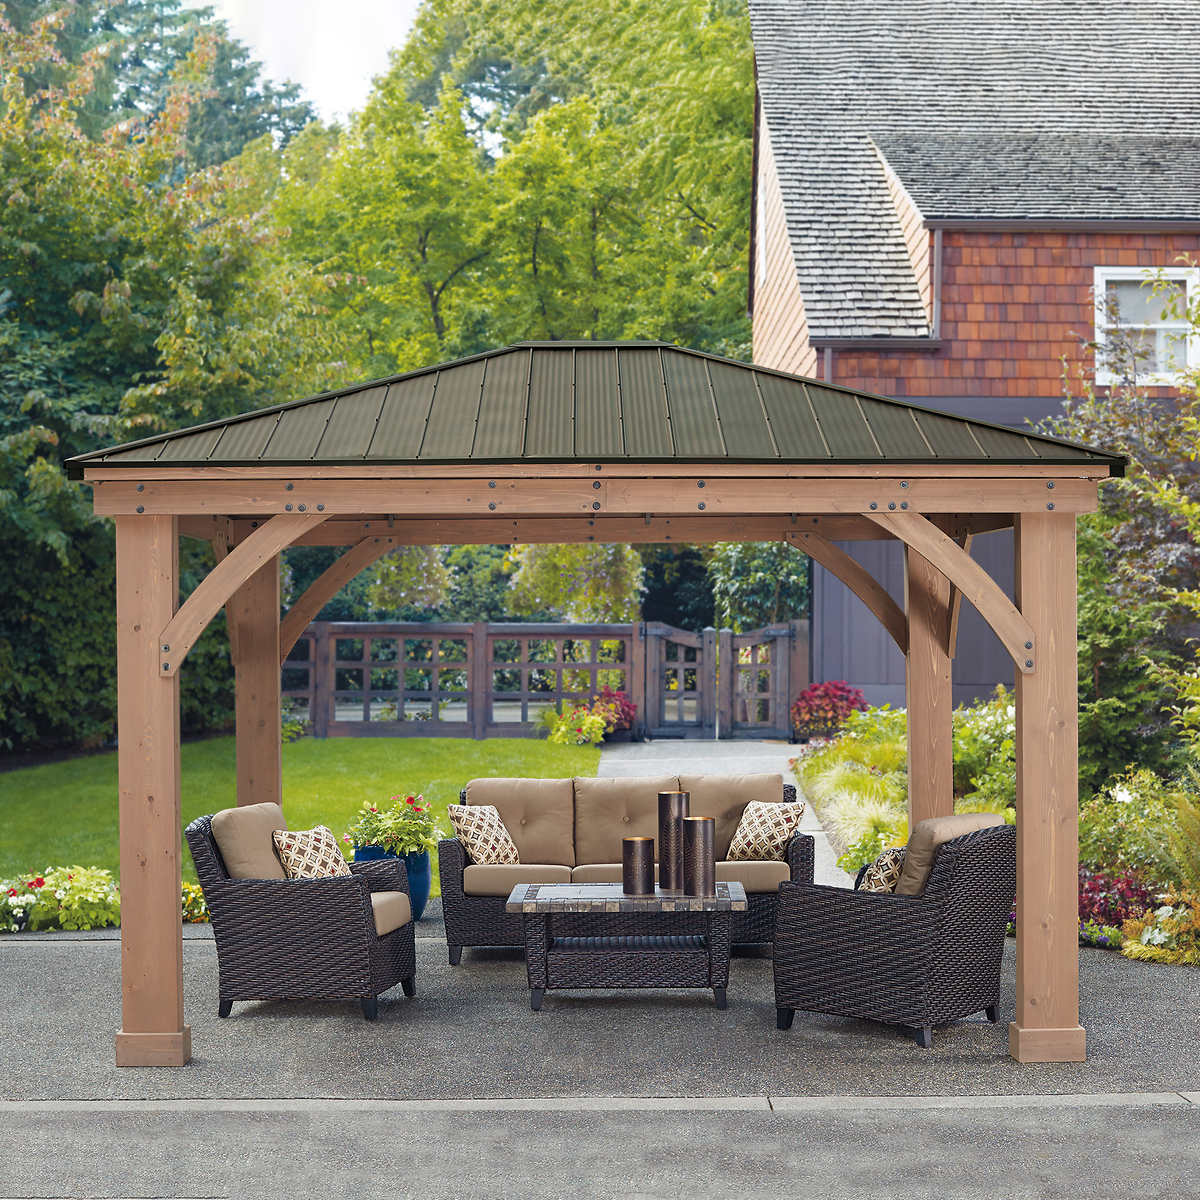 Cedar Gazebo With Aluminum Roof, Costco Outdoor Deck Awnings